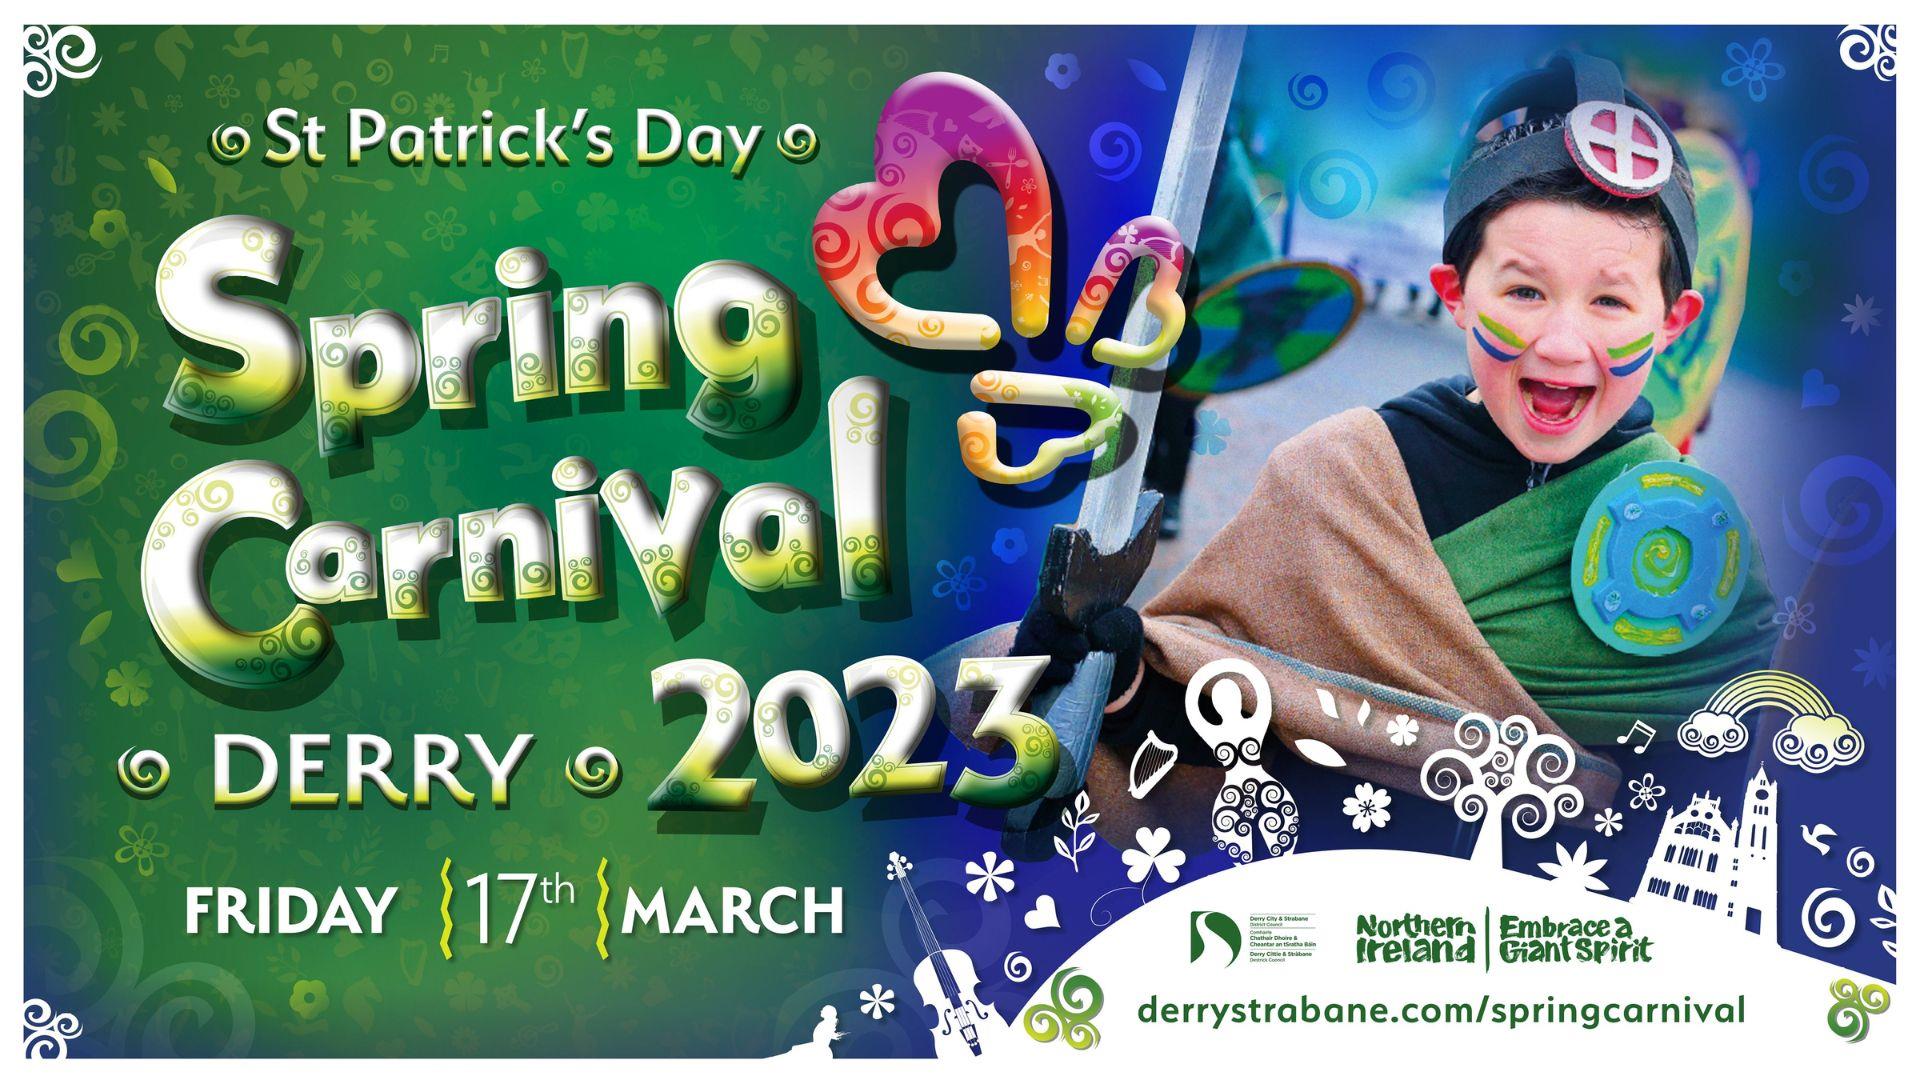 Promo image for the 2023 Spring Carnival Event in Derry-Londonderry.